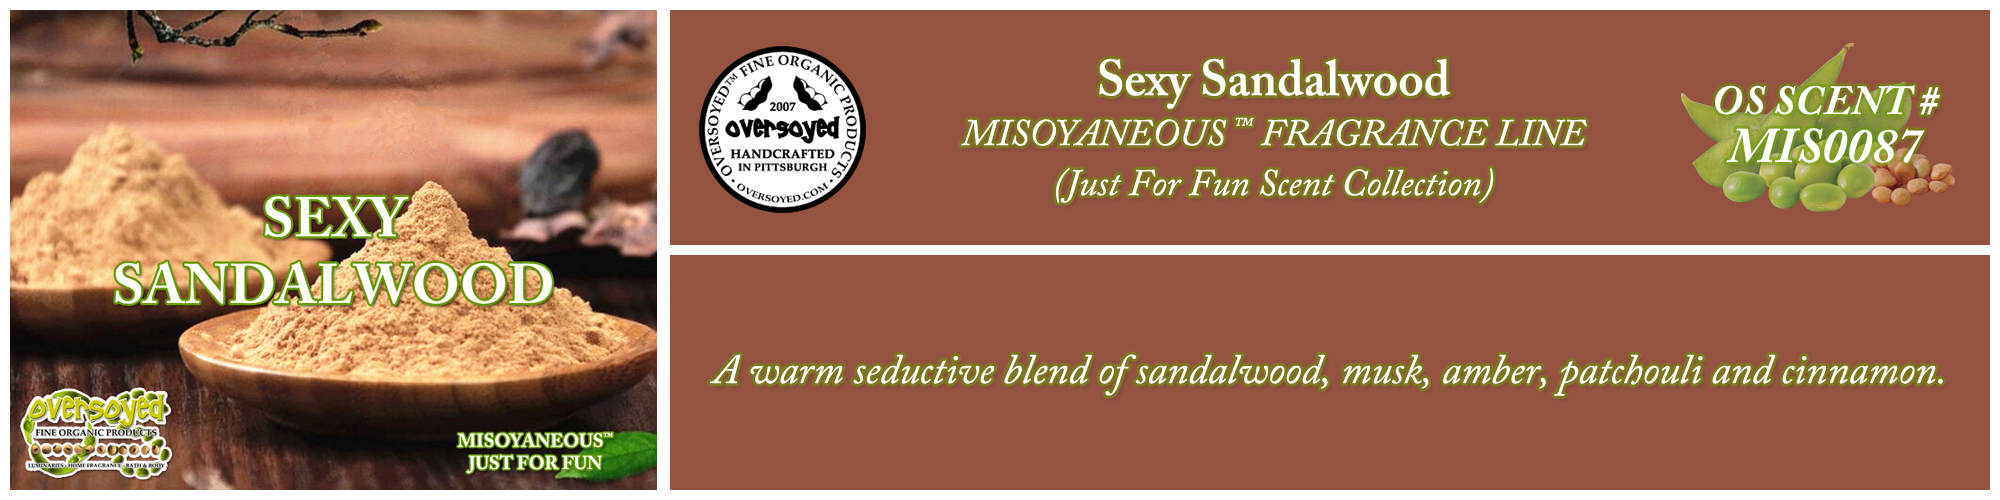 Sexy Sandalwood Handcrafted Products Collection